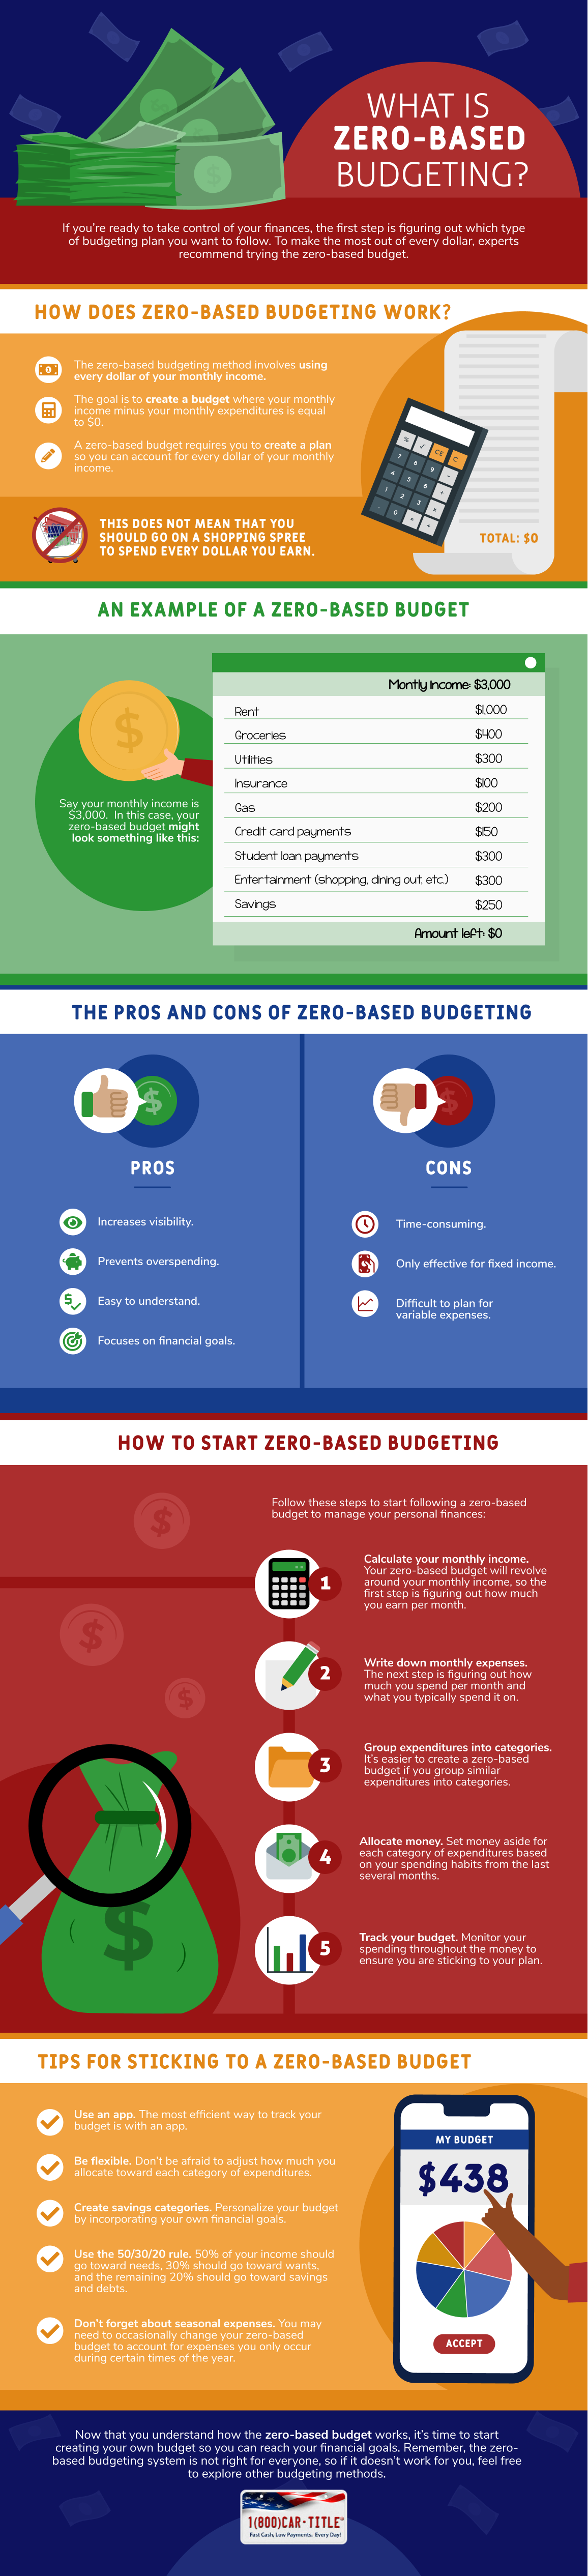 What is Zero-Based Budgeting?